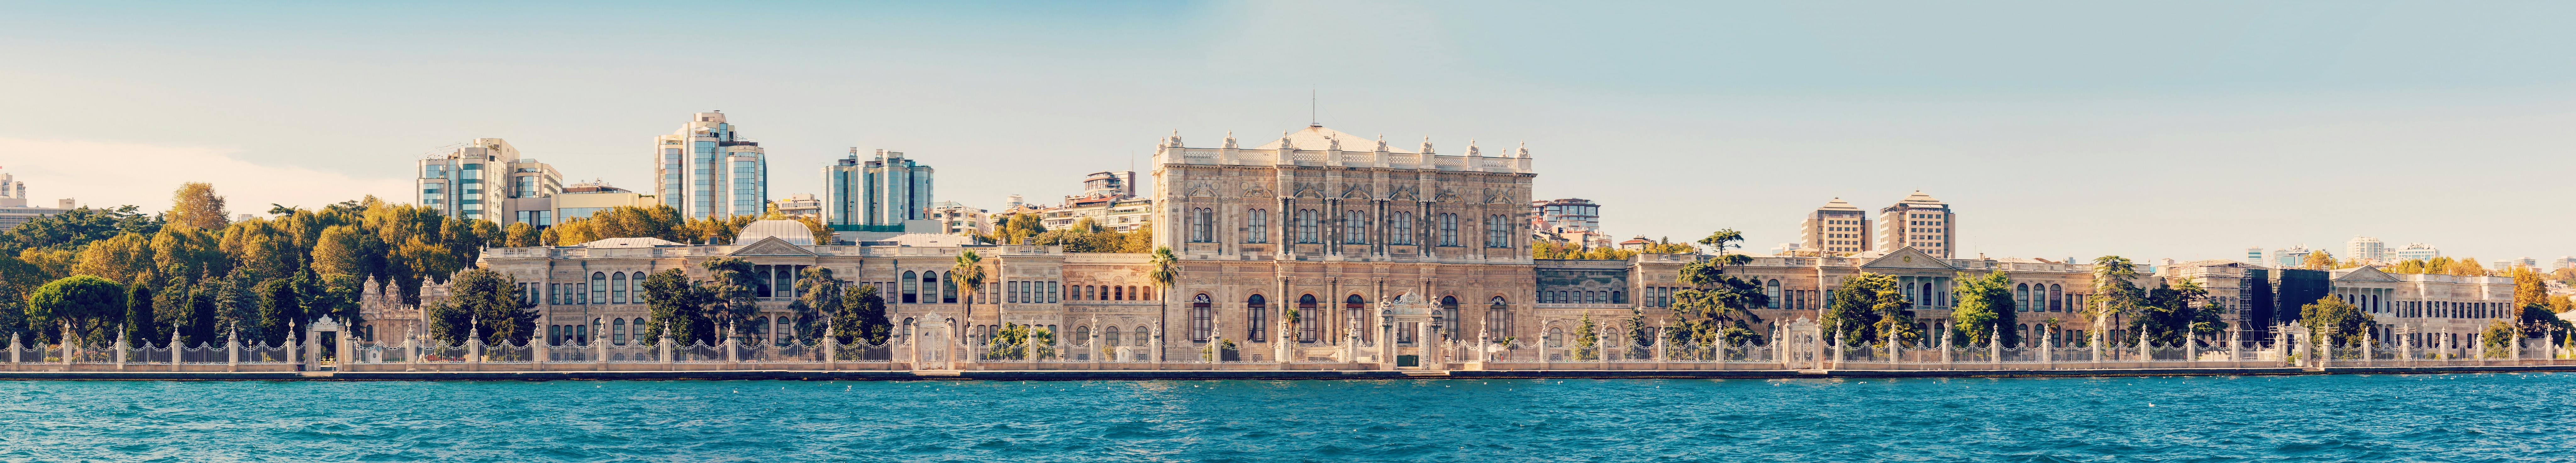 Skip the line ticket with guided tour to Dolmabahçe Palace in Istanbul Musement